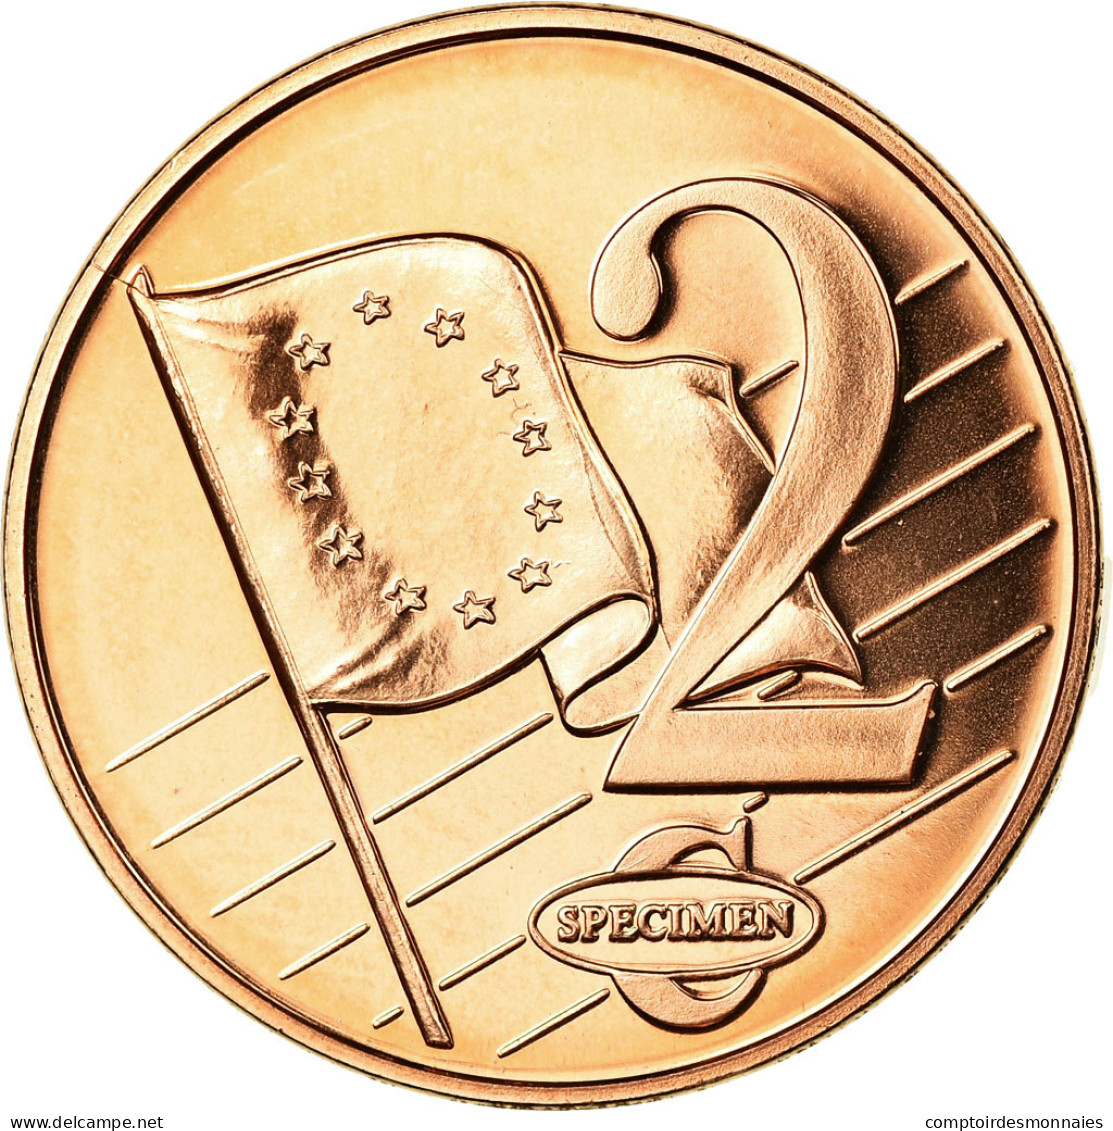 Vatican, 2 Euro Cent, Unofficial Private Coin, SPL, Copper Plated Steel - Privatentwürfe